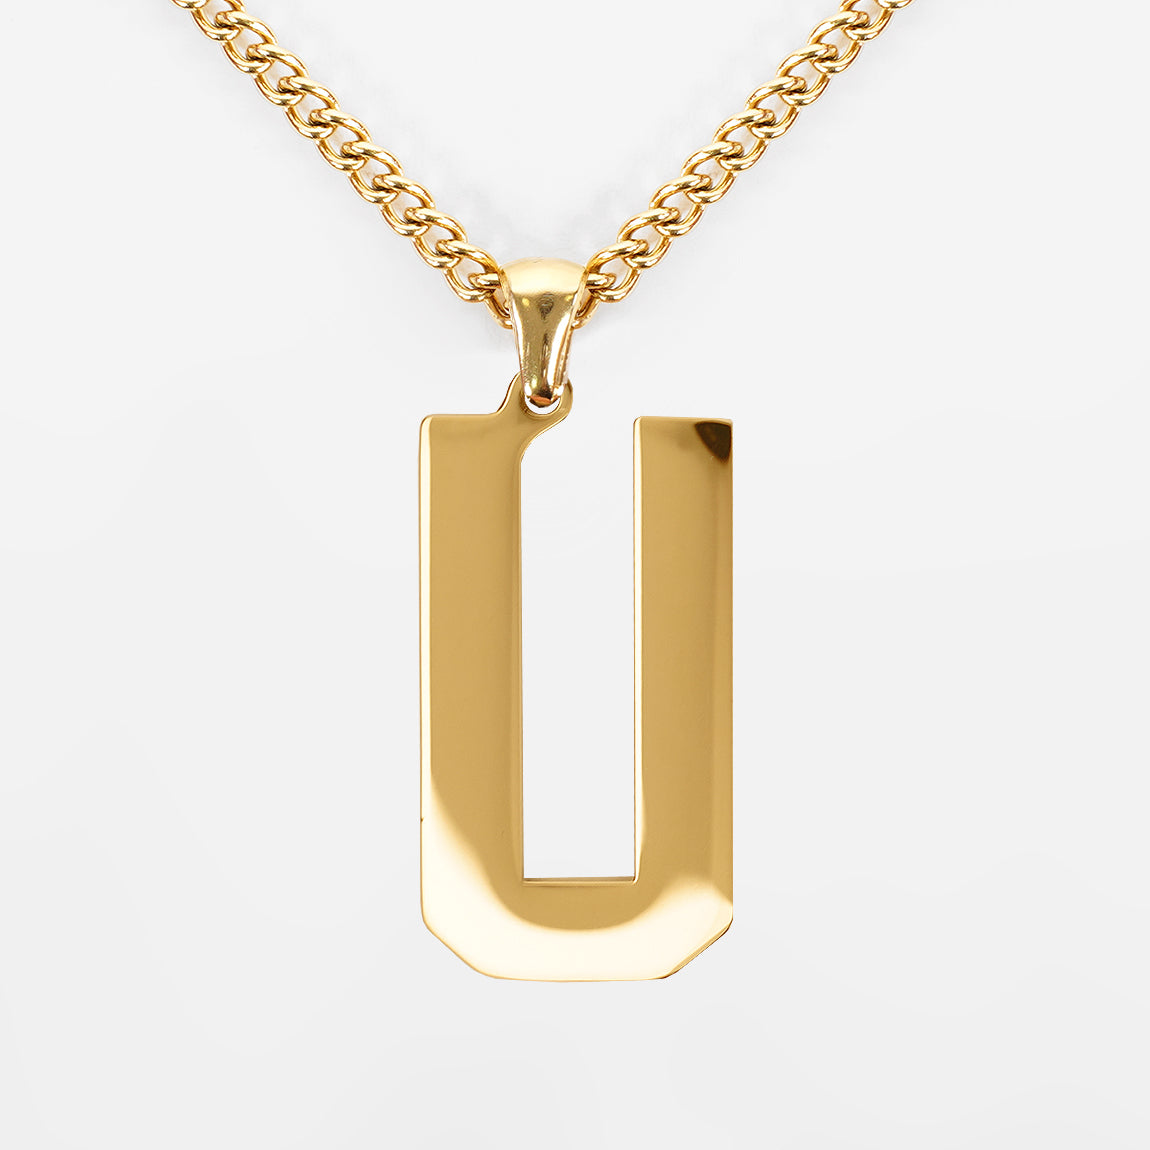 U Letter Pendant with Chain Necklace - Gold Plated Stainless Steel